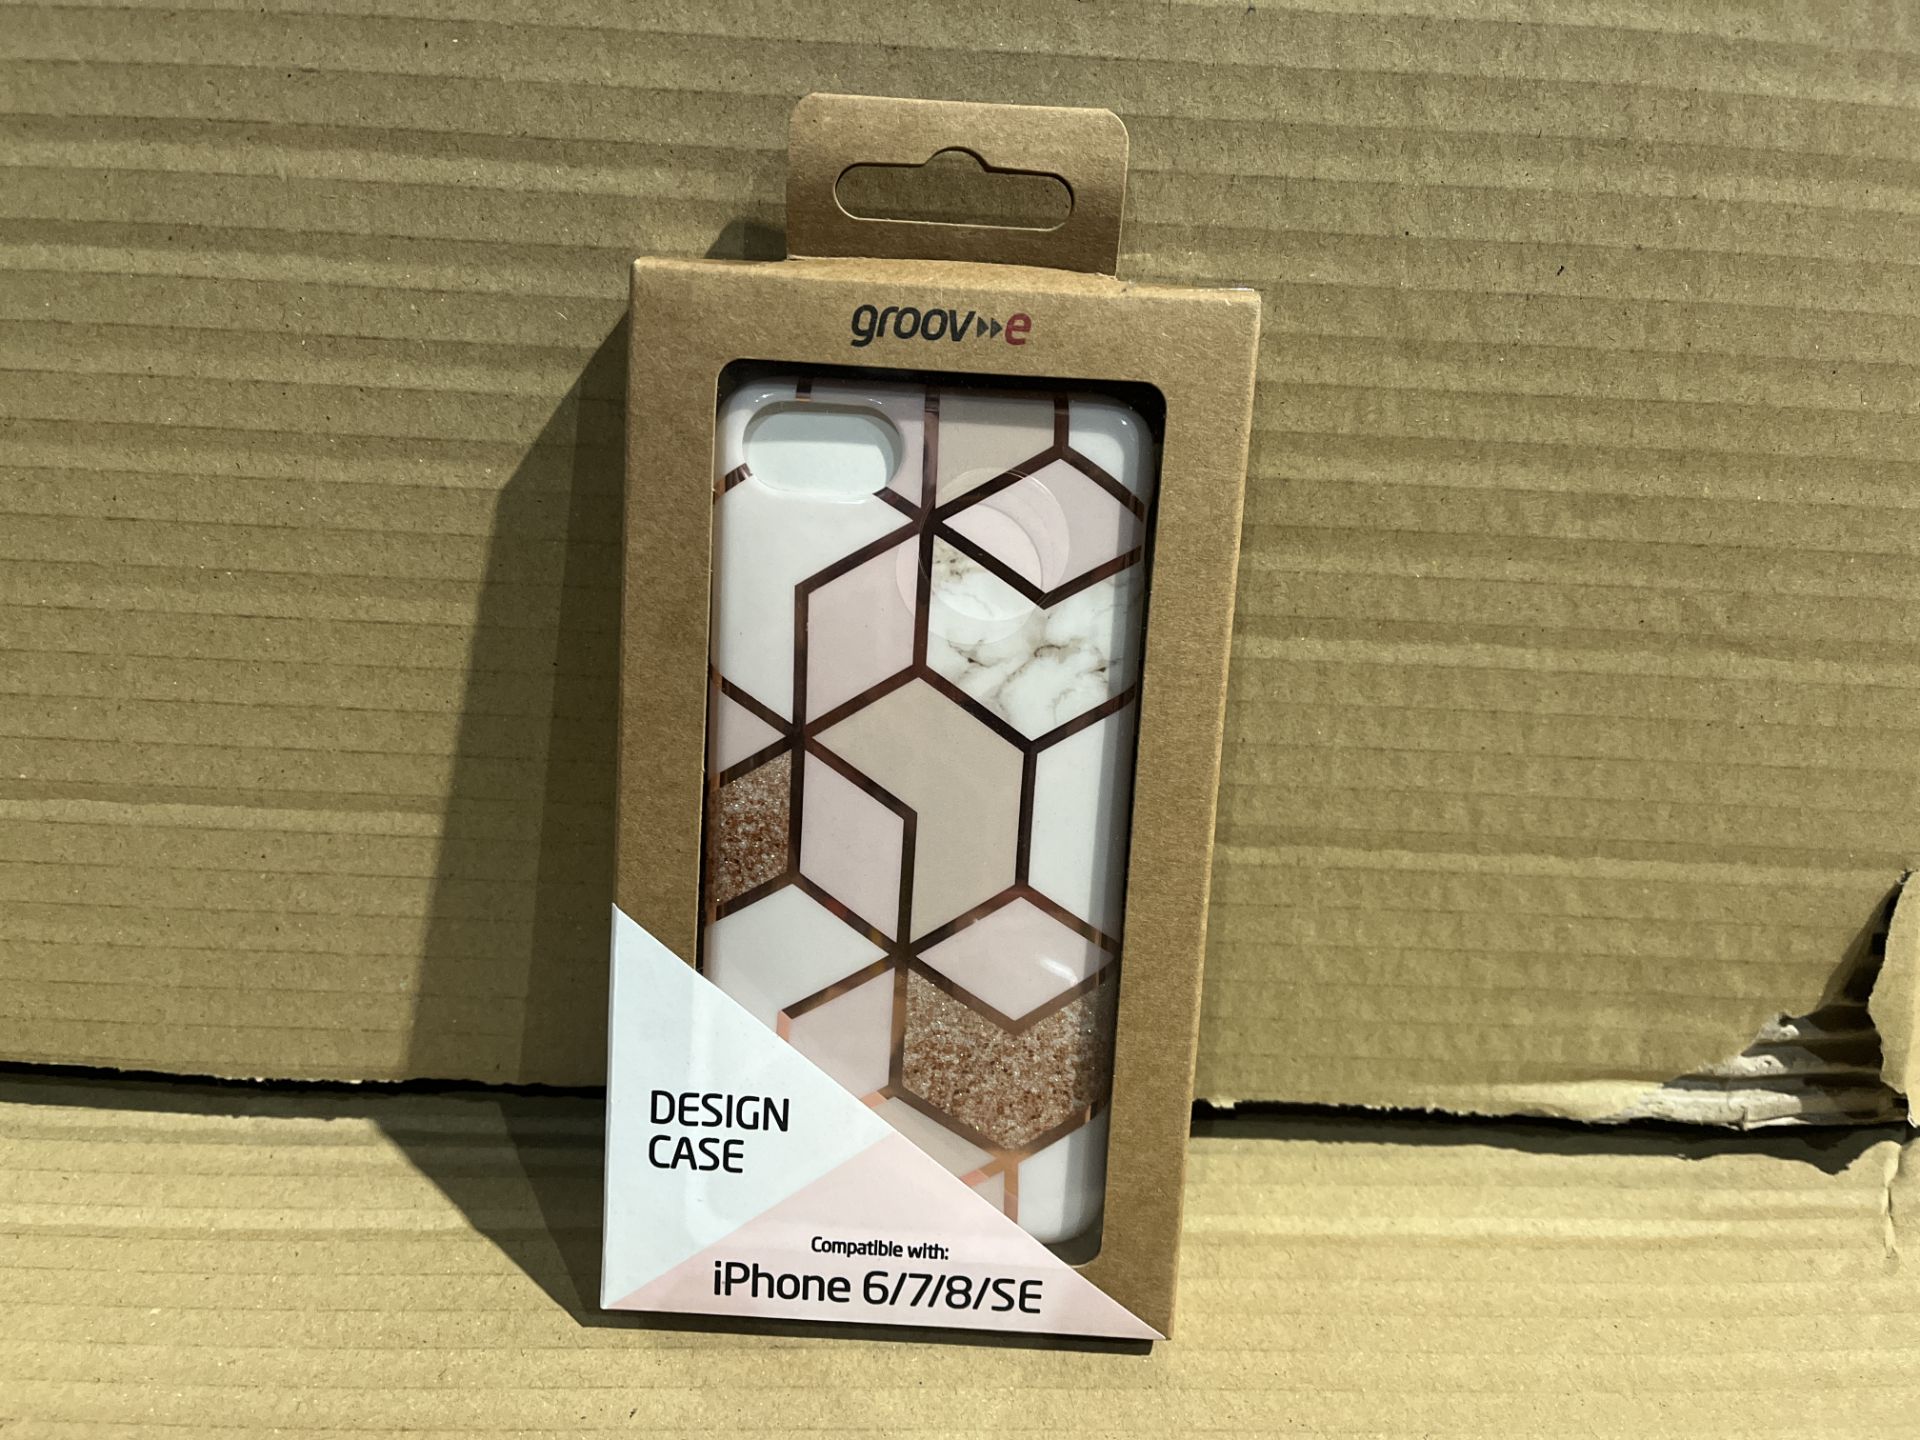 200 X BRAND NEW GROOVE DESIGN CASES FOR IPHONE6-8 R9B